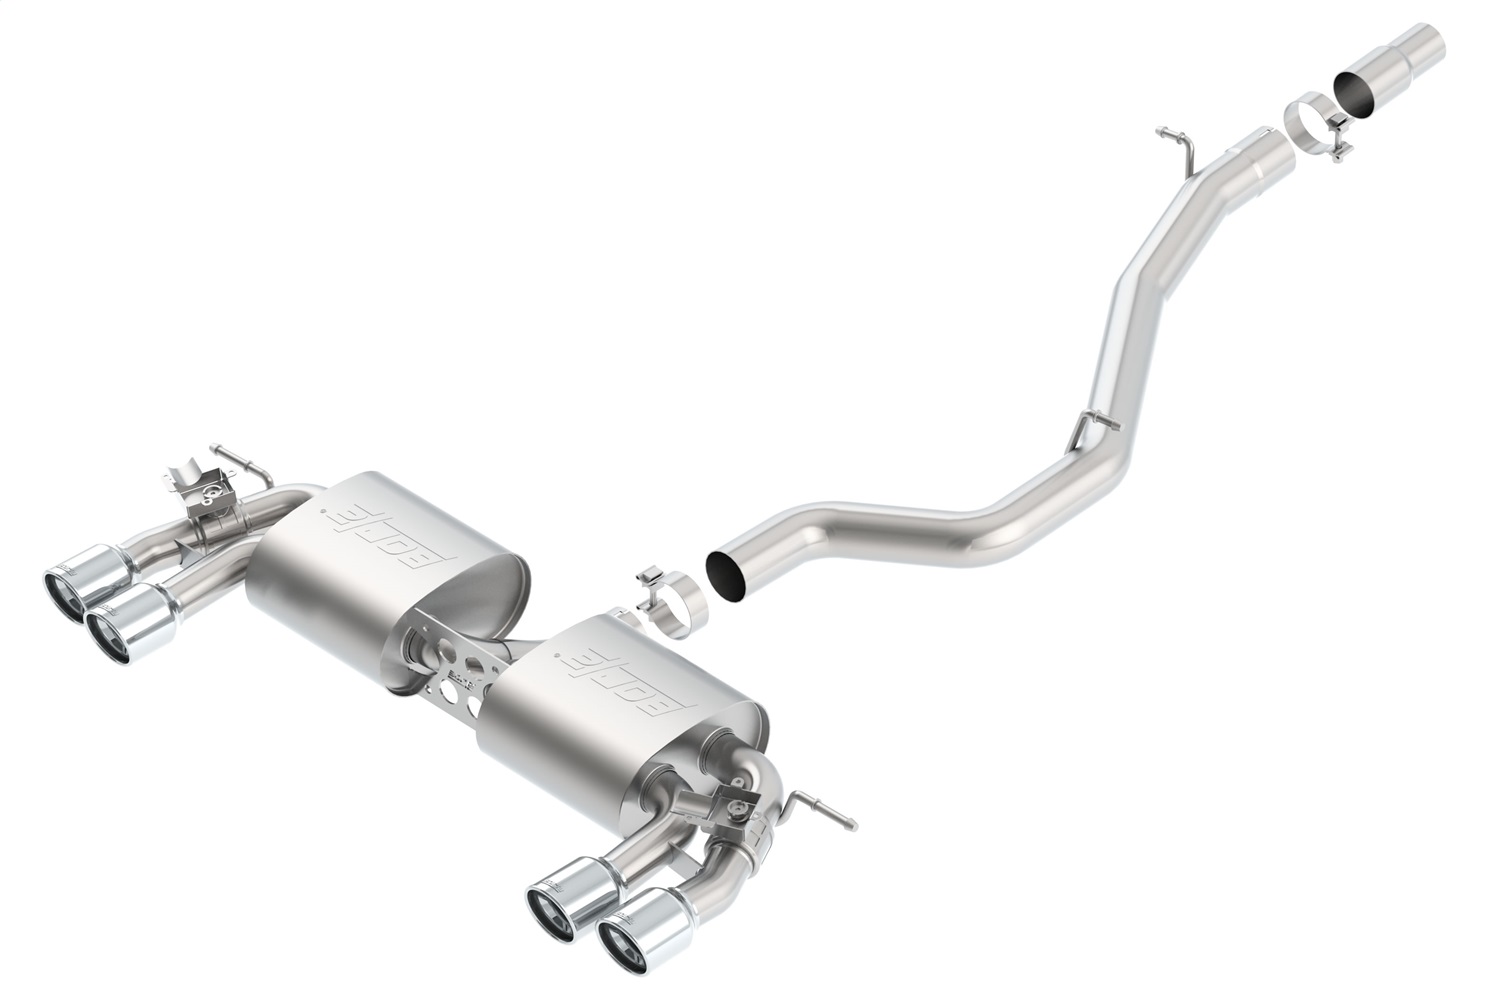 Borla 140643 S-Type Cat-Back Exhaust System Fits 15-17 Golf R